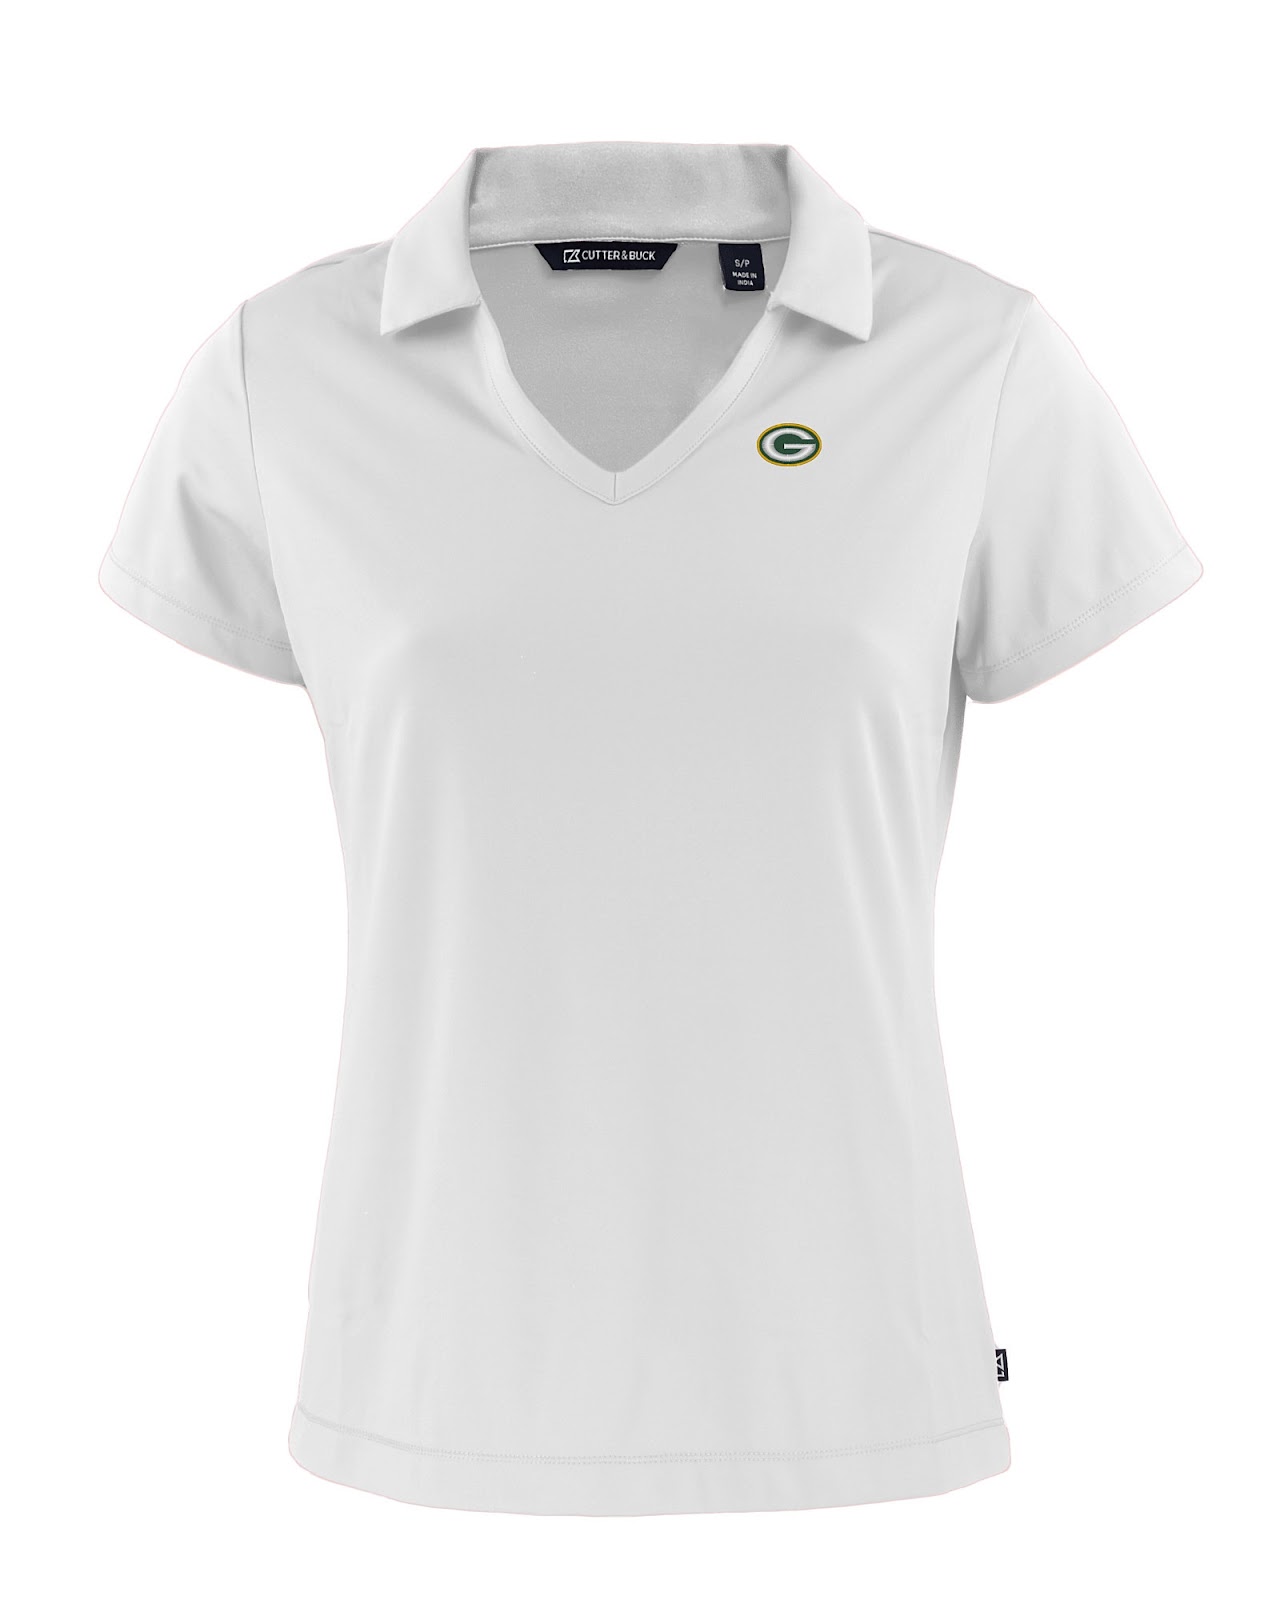 Green Bay Packers v-neck polo